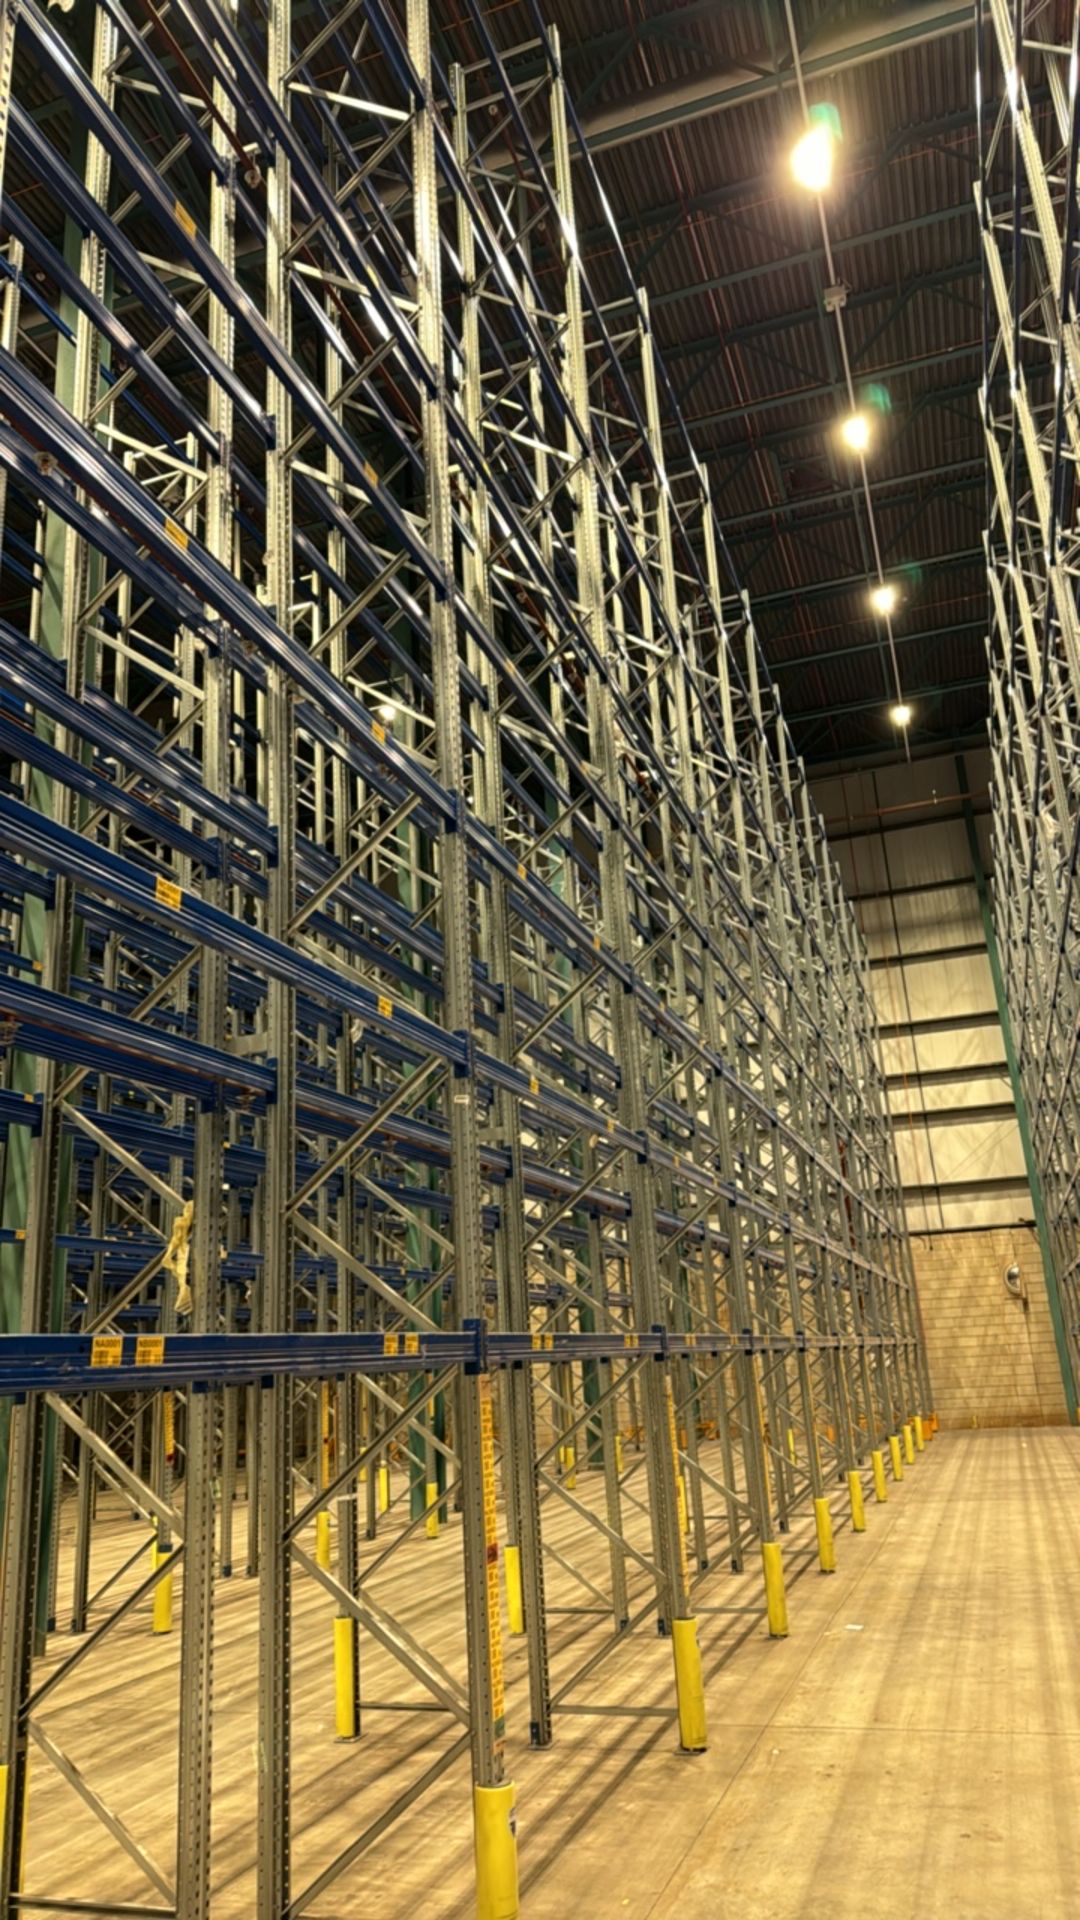 Run Of 22 Bays Of Back To Back Boltless Pallet Racking - Image 8 of 10